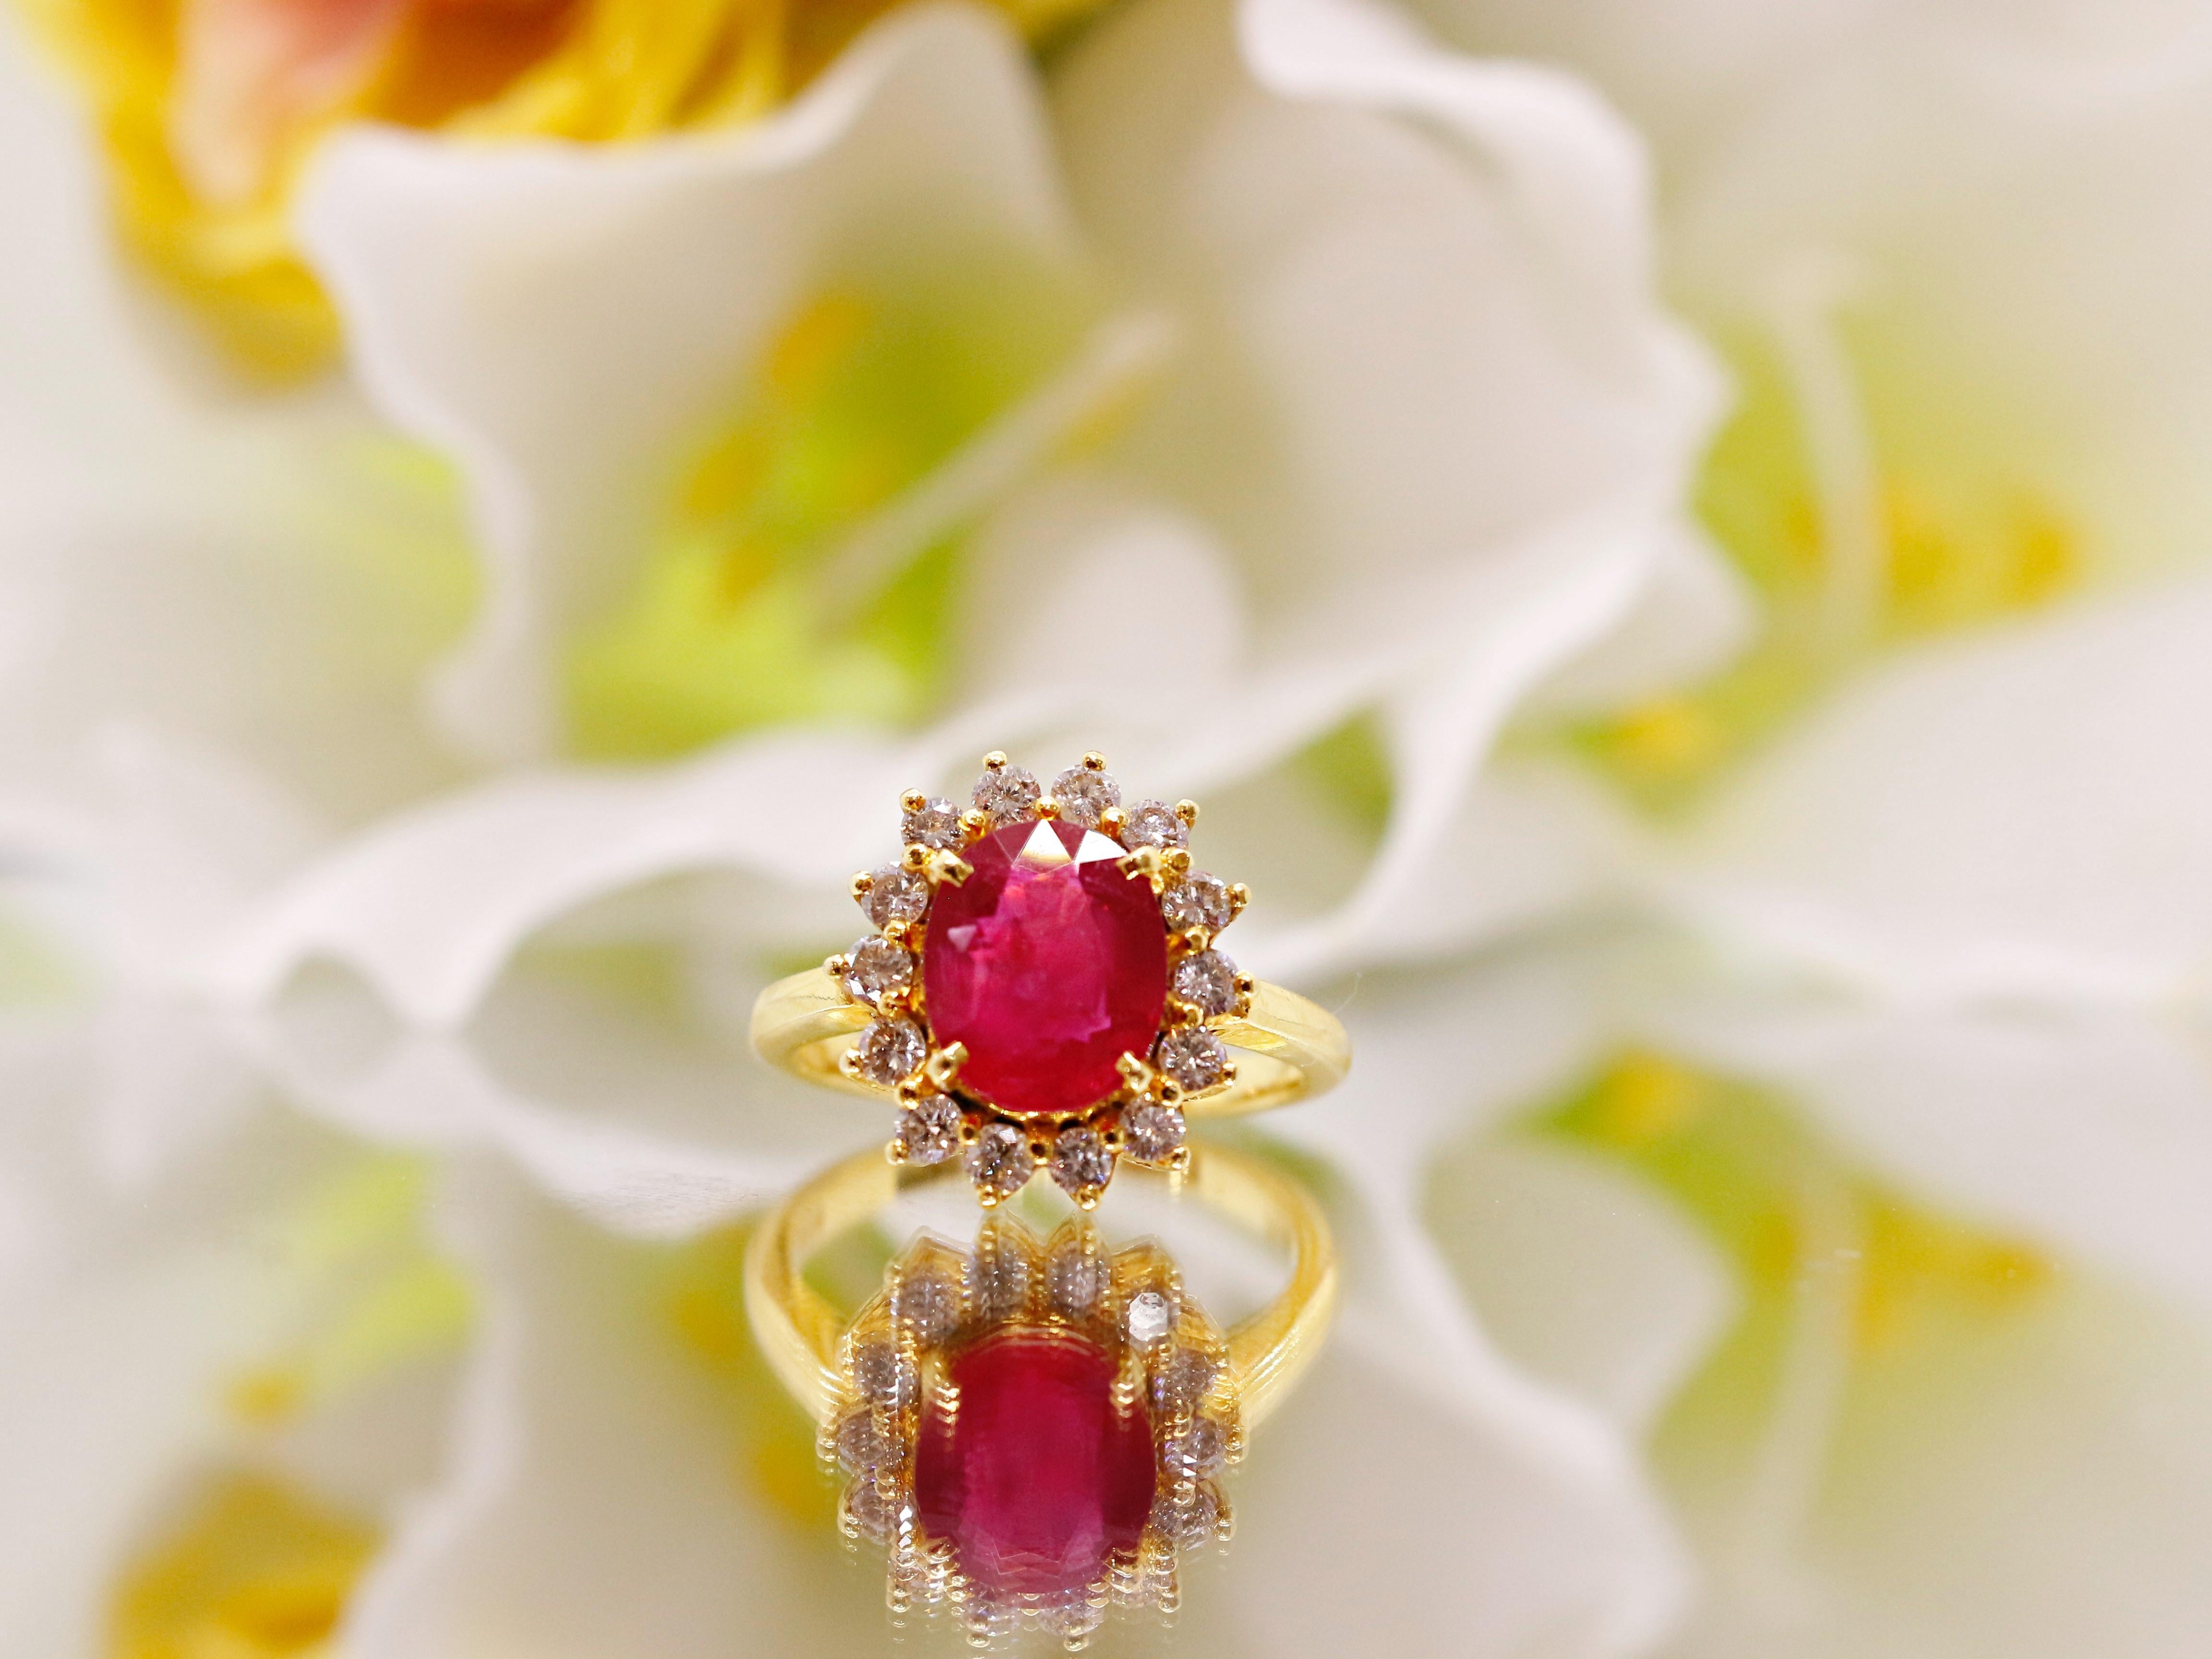 
Elegant 14Kt Gold Spinel Diamond Halo Ring

Solid 14Kt Gold Craftsmanship
Experience the pinnacle of luxury with our ring, crafted in solid 14kt gold, embodying timeless elegance and unparalleled quality.

Ruby Centerpiece: 3 CT
A stunning 3 CT